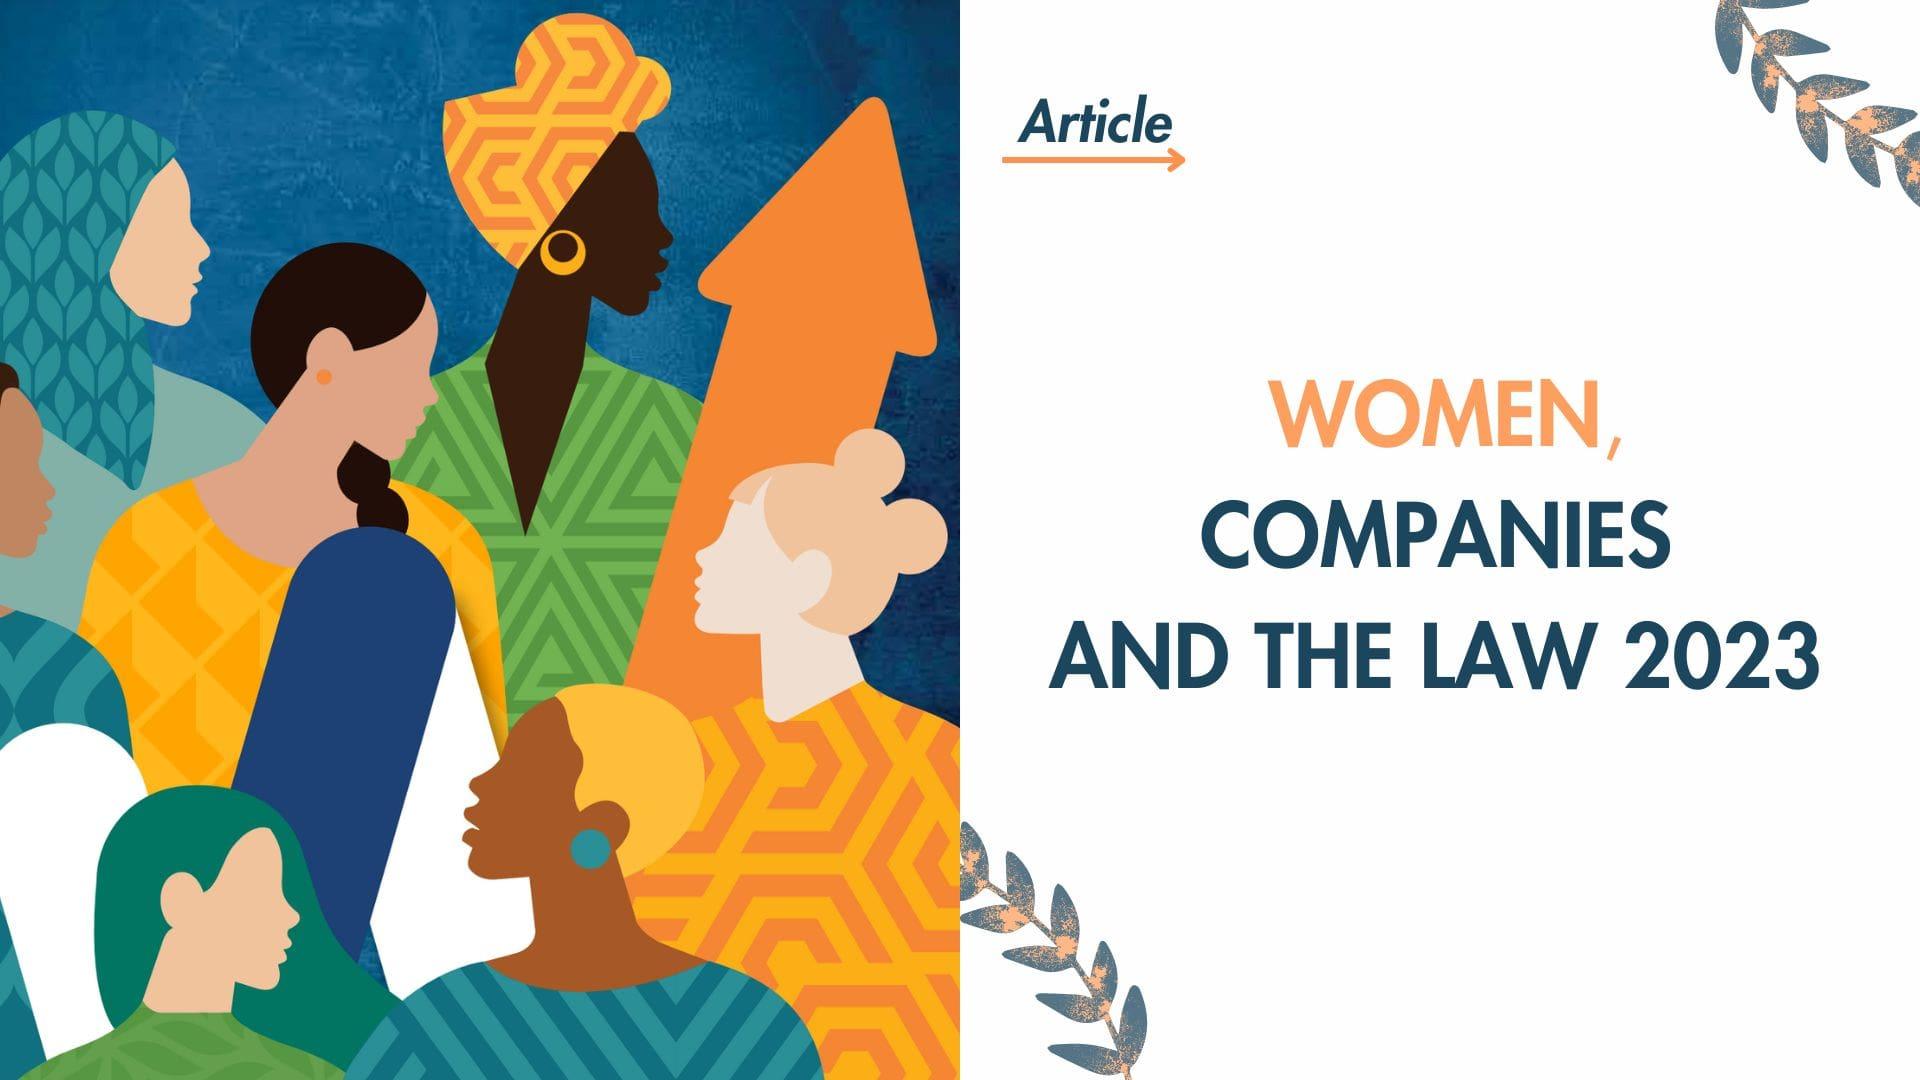 International Women's Rights Day: WOMEN, COMPANIES AND THE LAW 2023